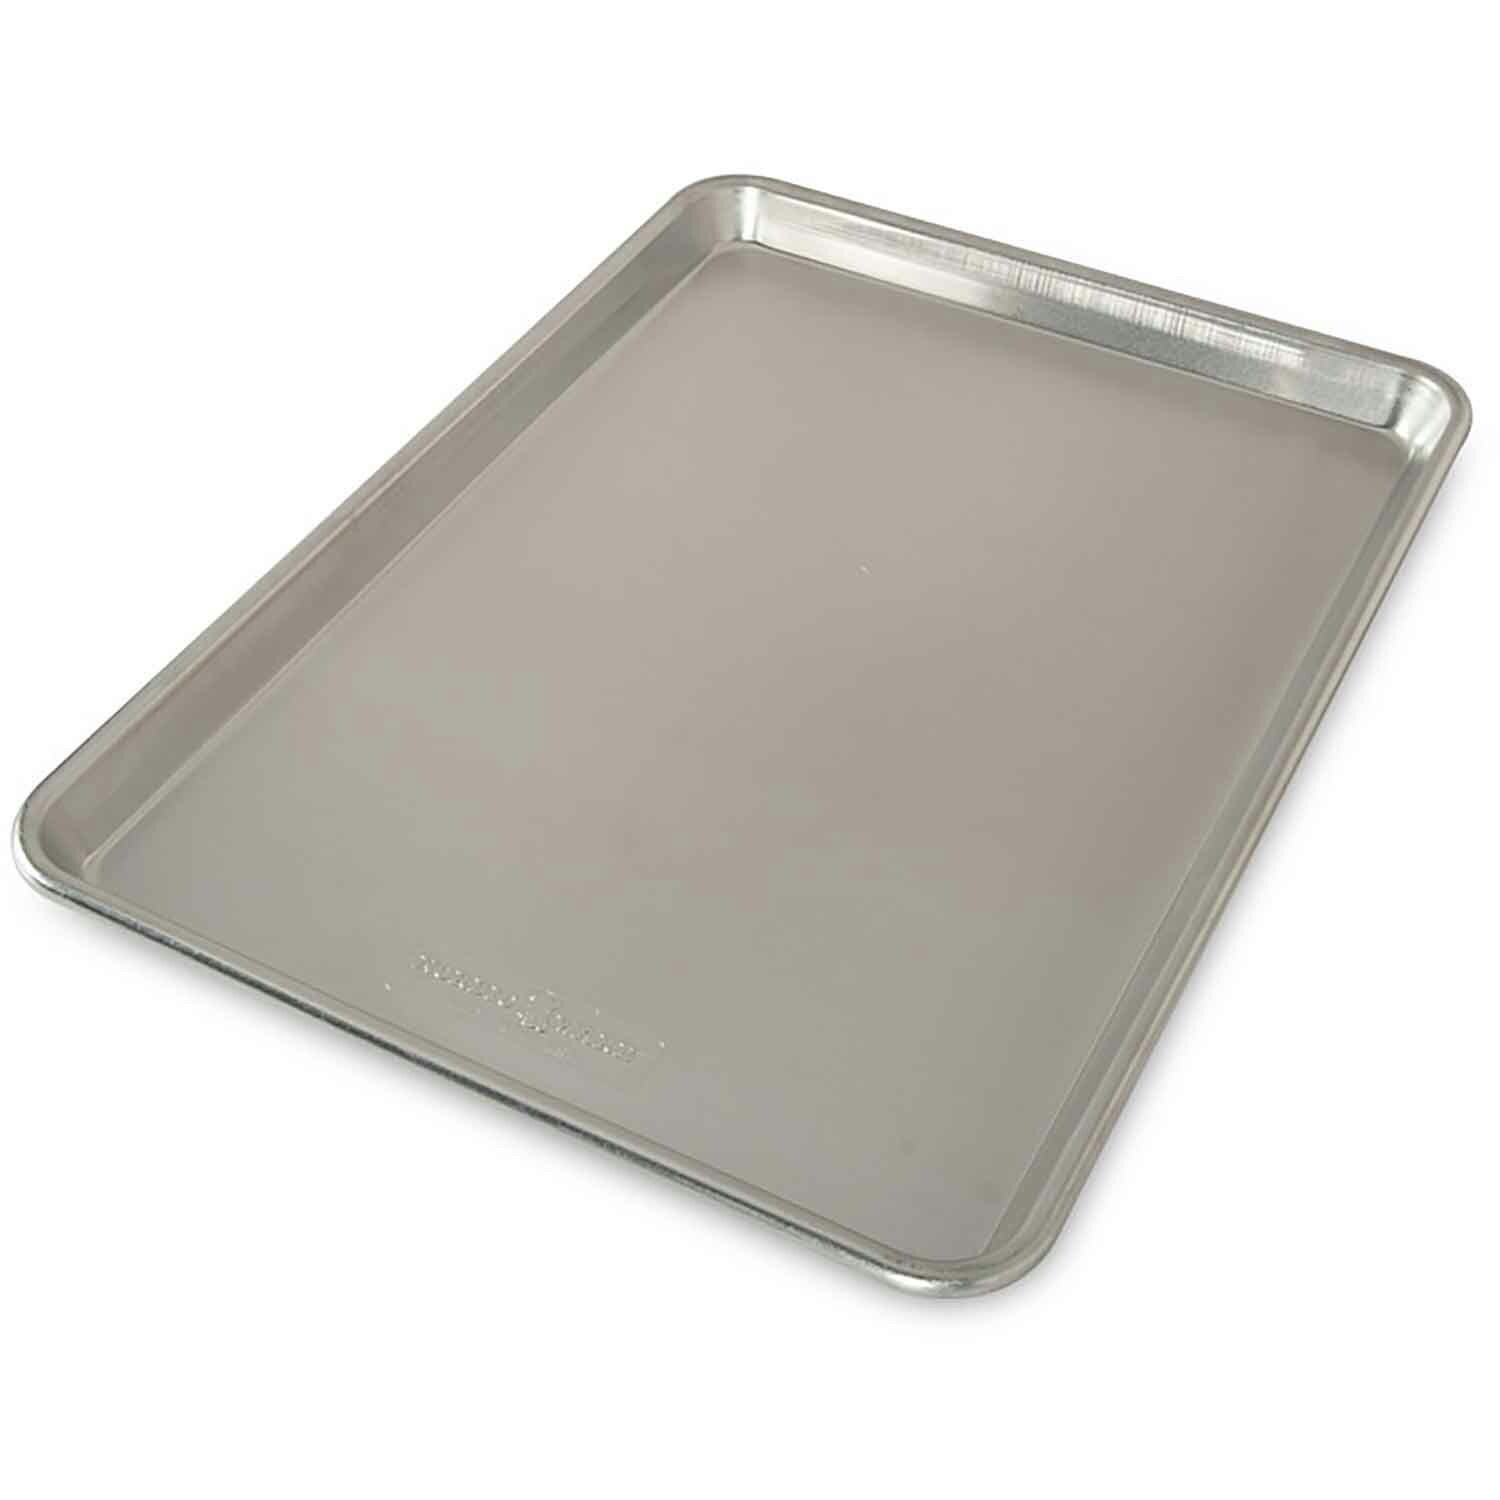 Prism Half Sheet Pan with Non-Stick Grid